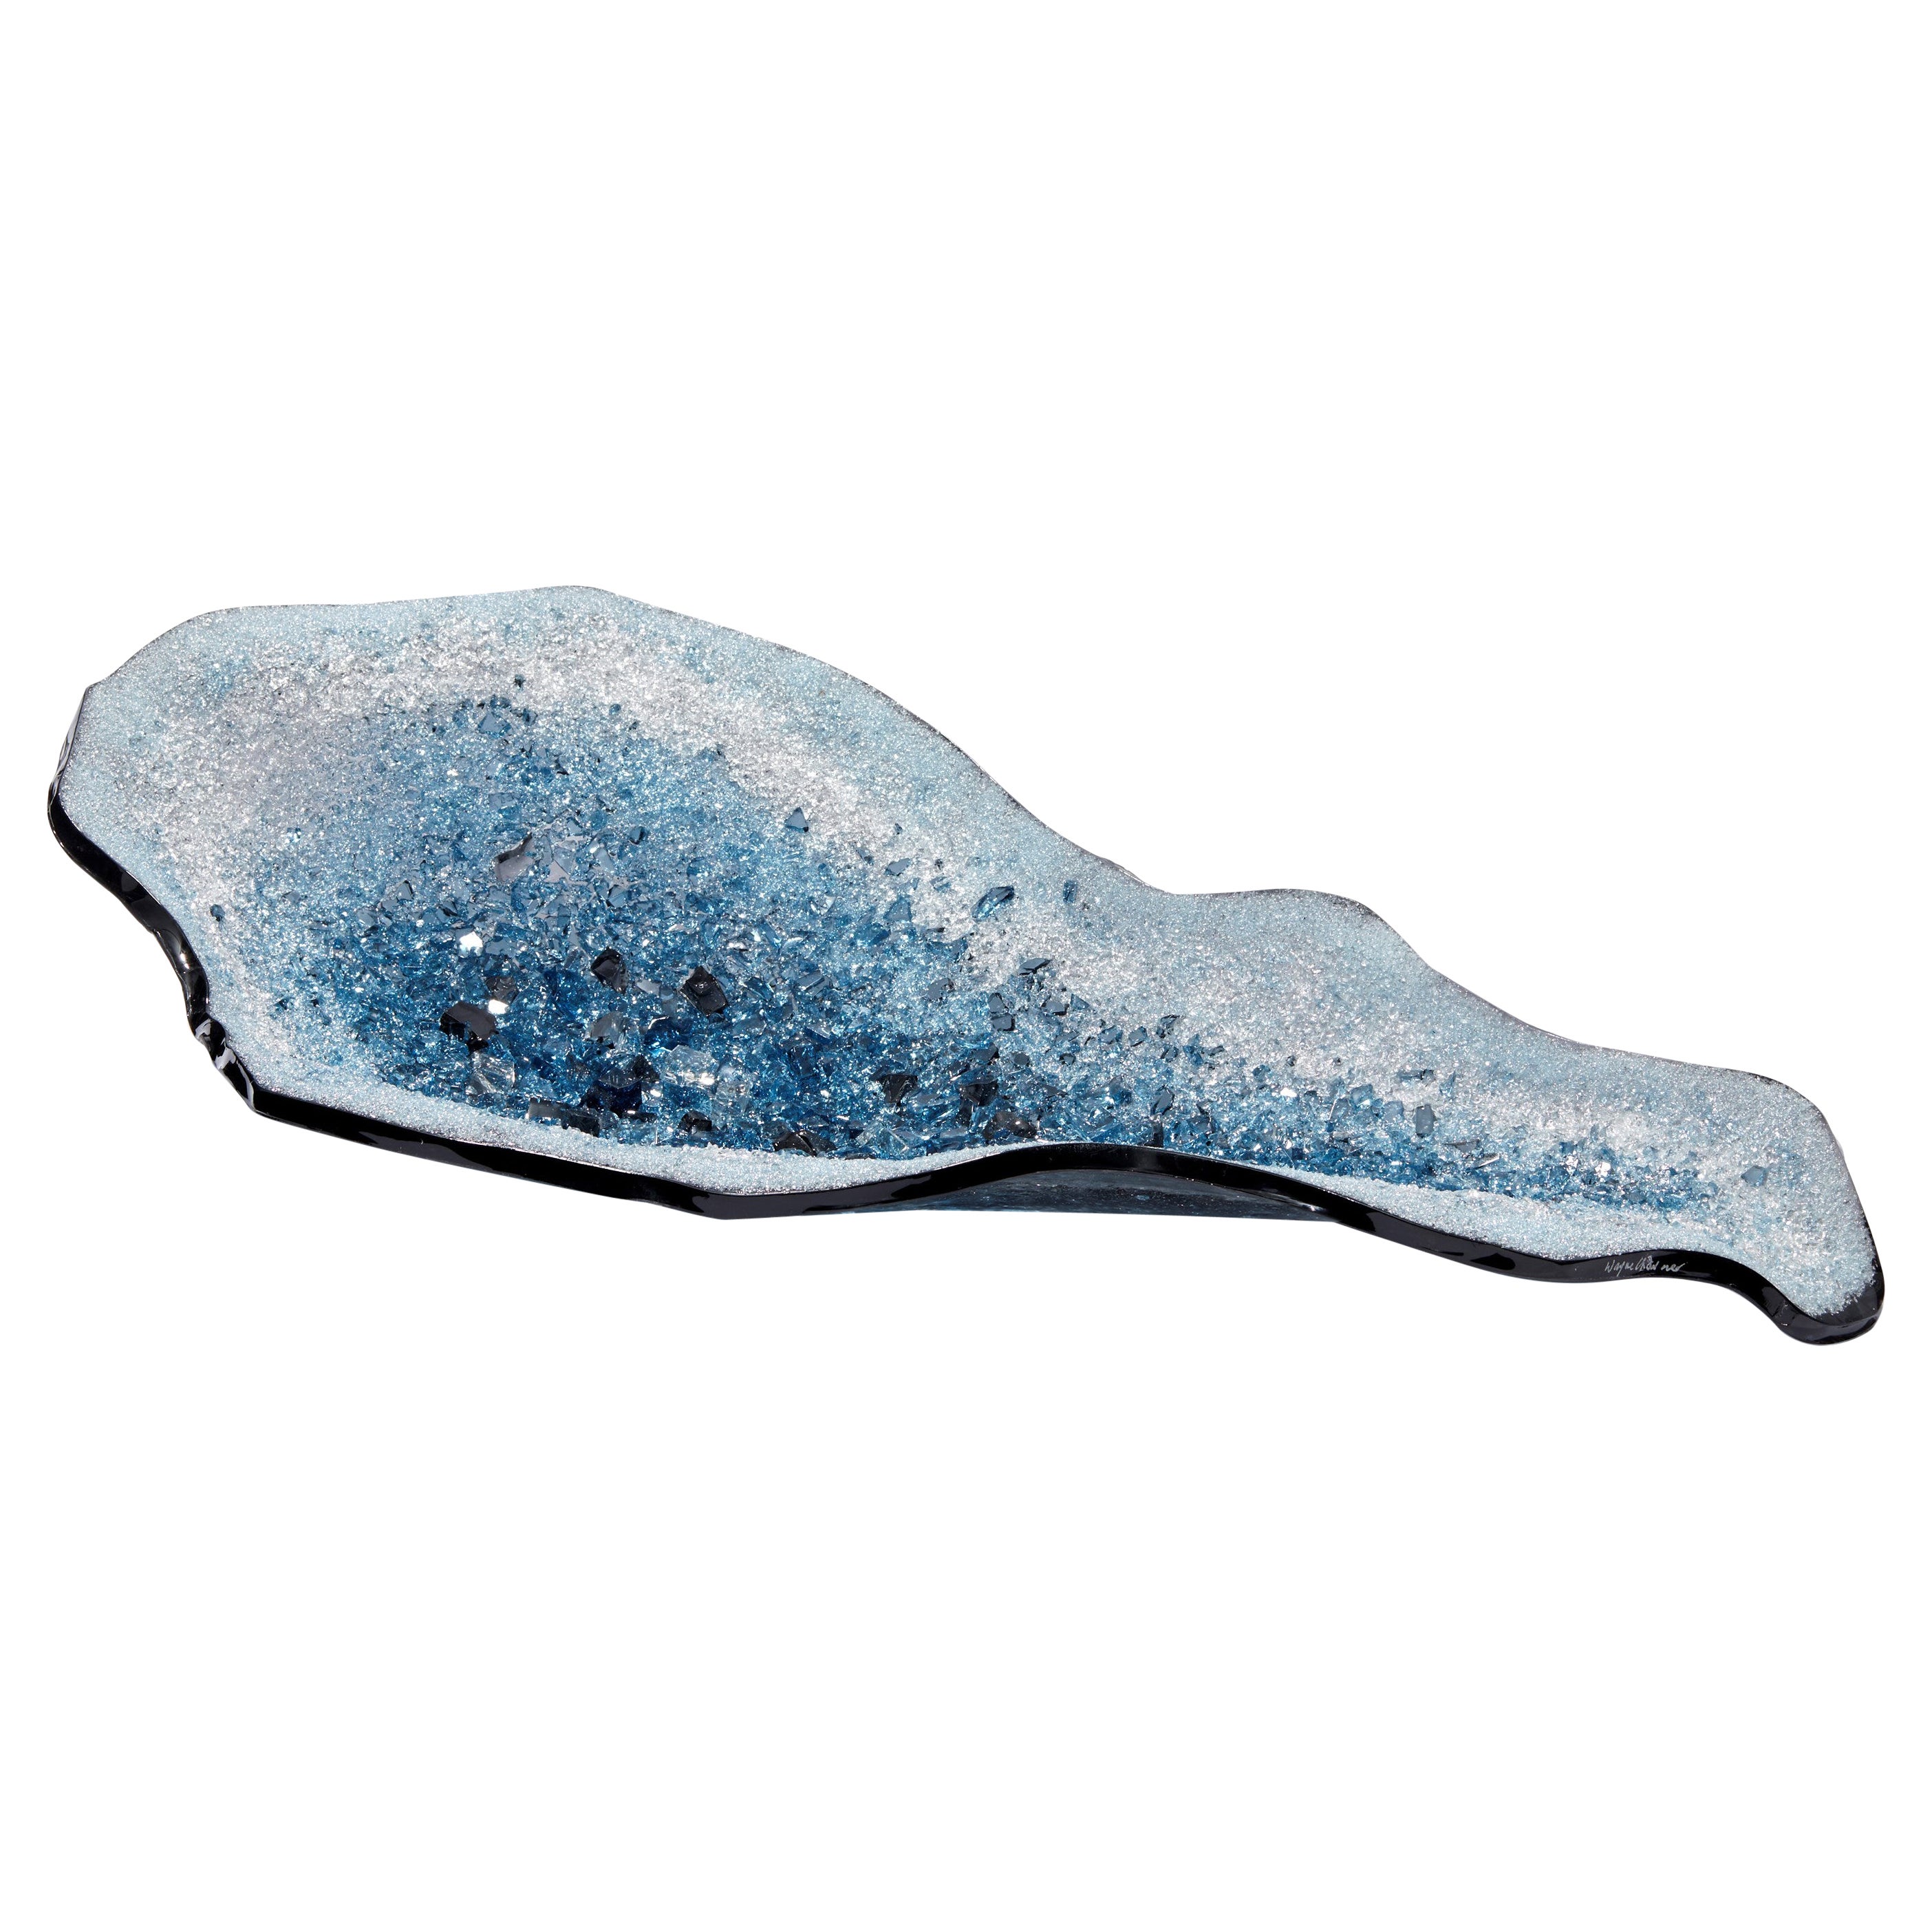 Celestine viii, a Blue & Turquoise Geode Theme Glass Sculpture by Wayne Charmer For Sale